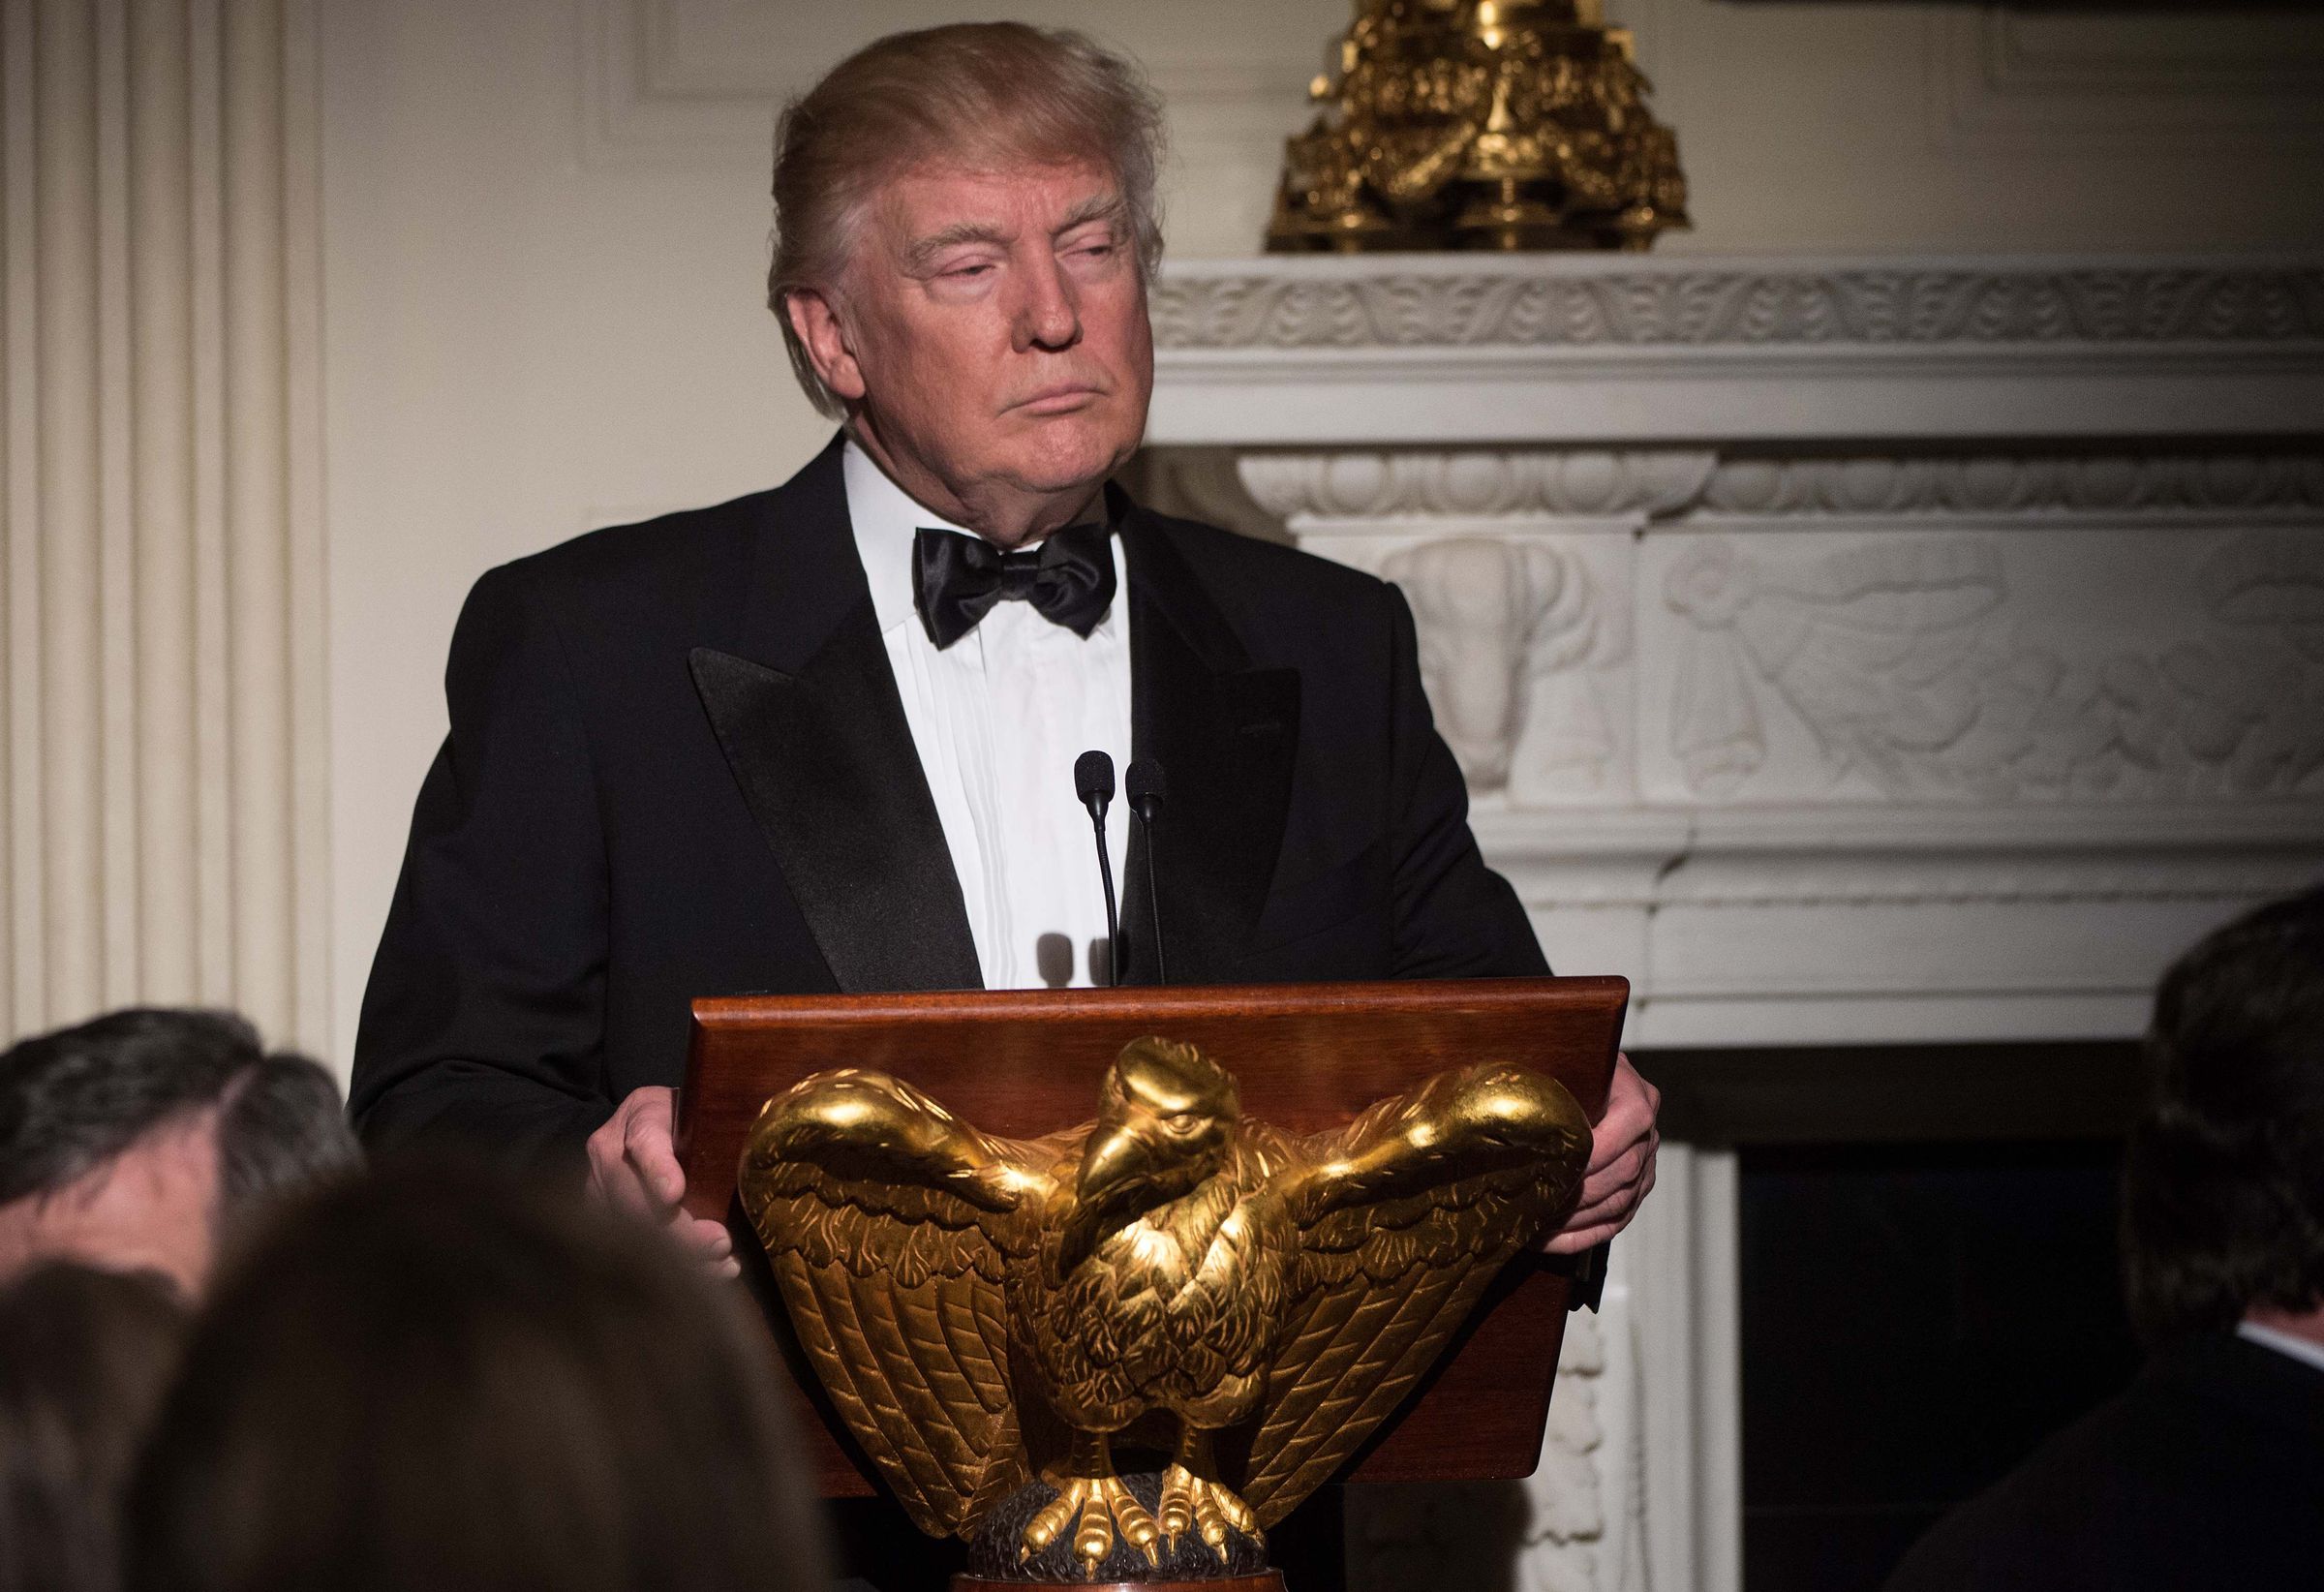 US President Donald Trump addresses the annual Governors' Dinner at the White House in Washington, DC, on February 26, 2017